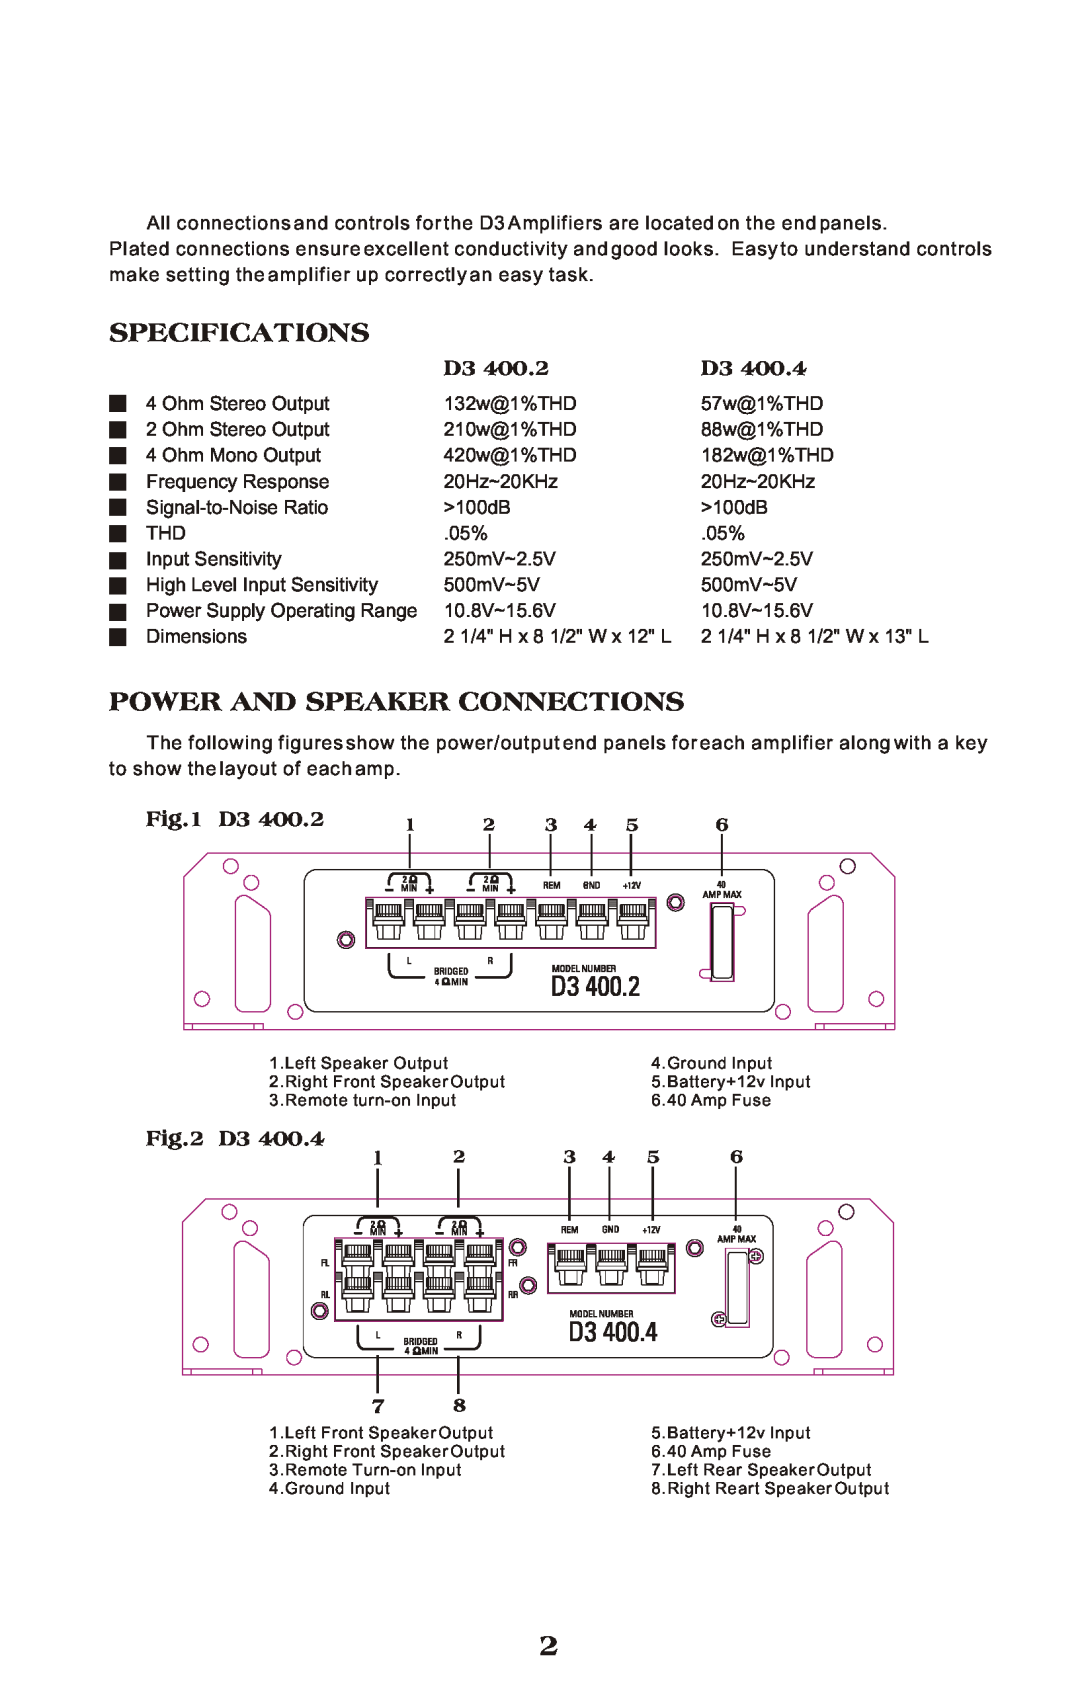 Diamond Audio Technology D3 Series specifications Specifications, Power And Speaker Connections 